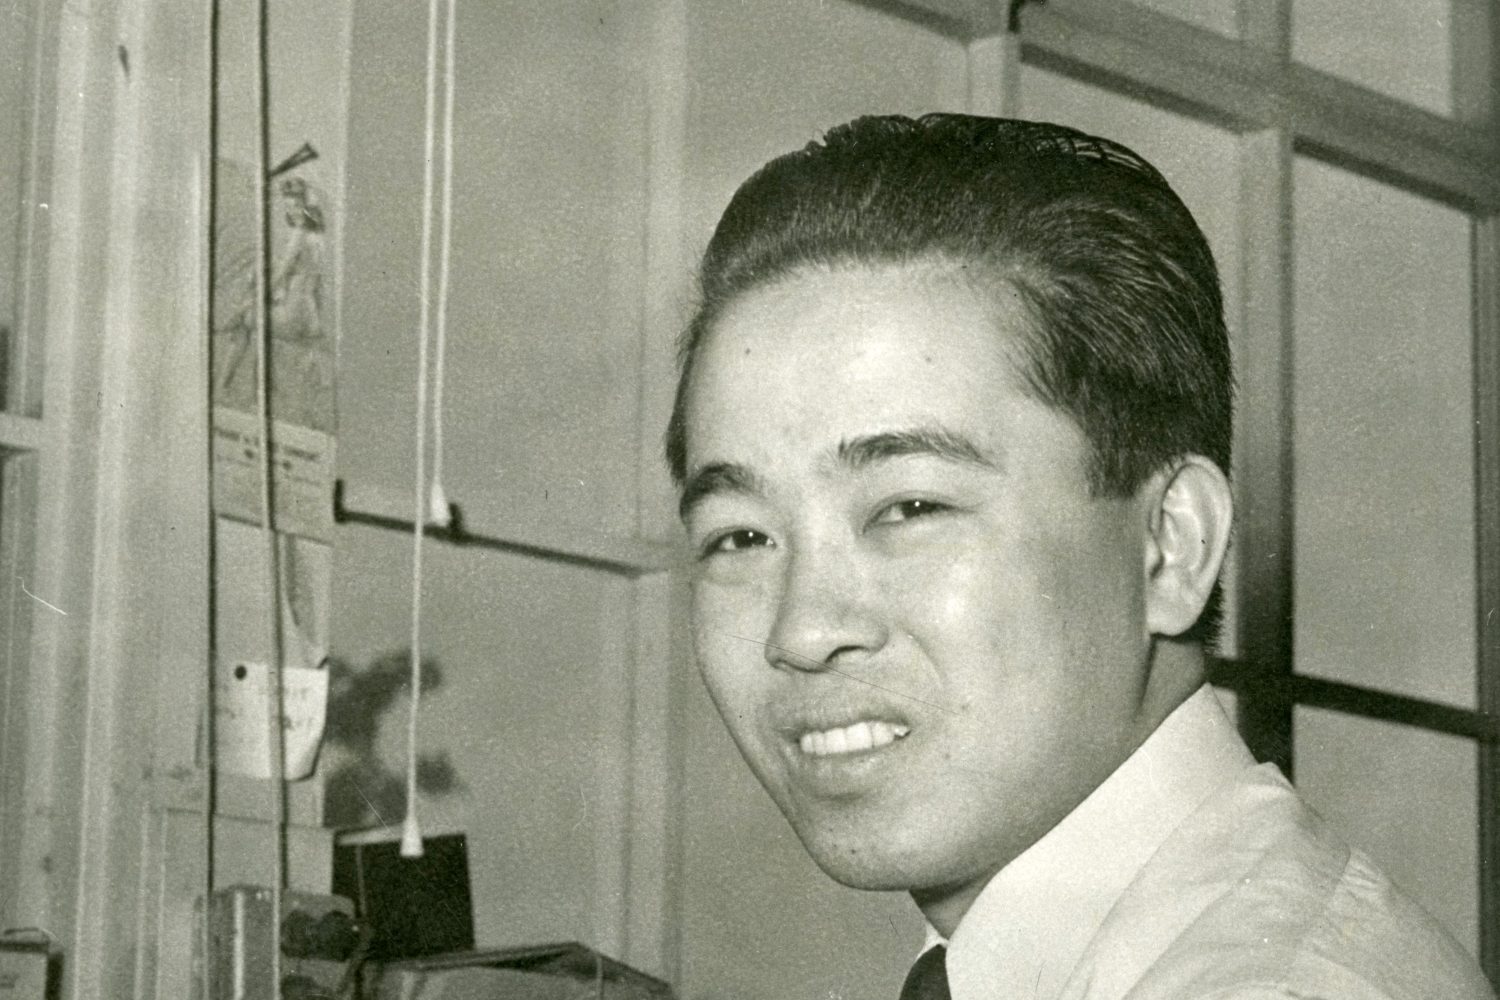 Photo of Art Fong, the earliest known Asian-American engineer to work for a Silicon Valley tech company.